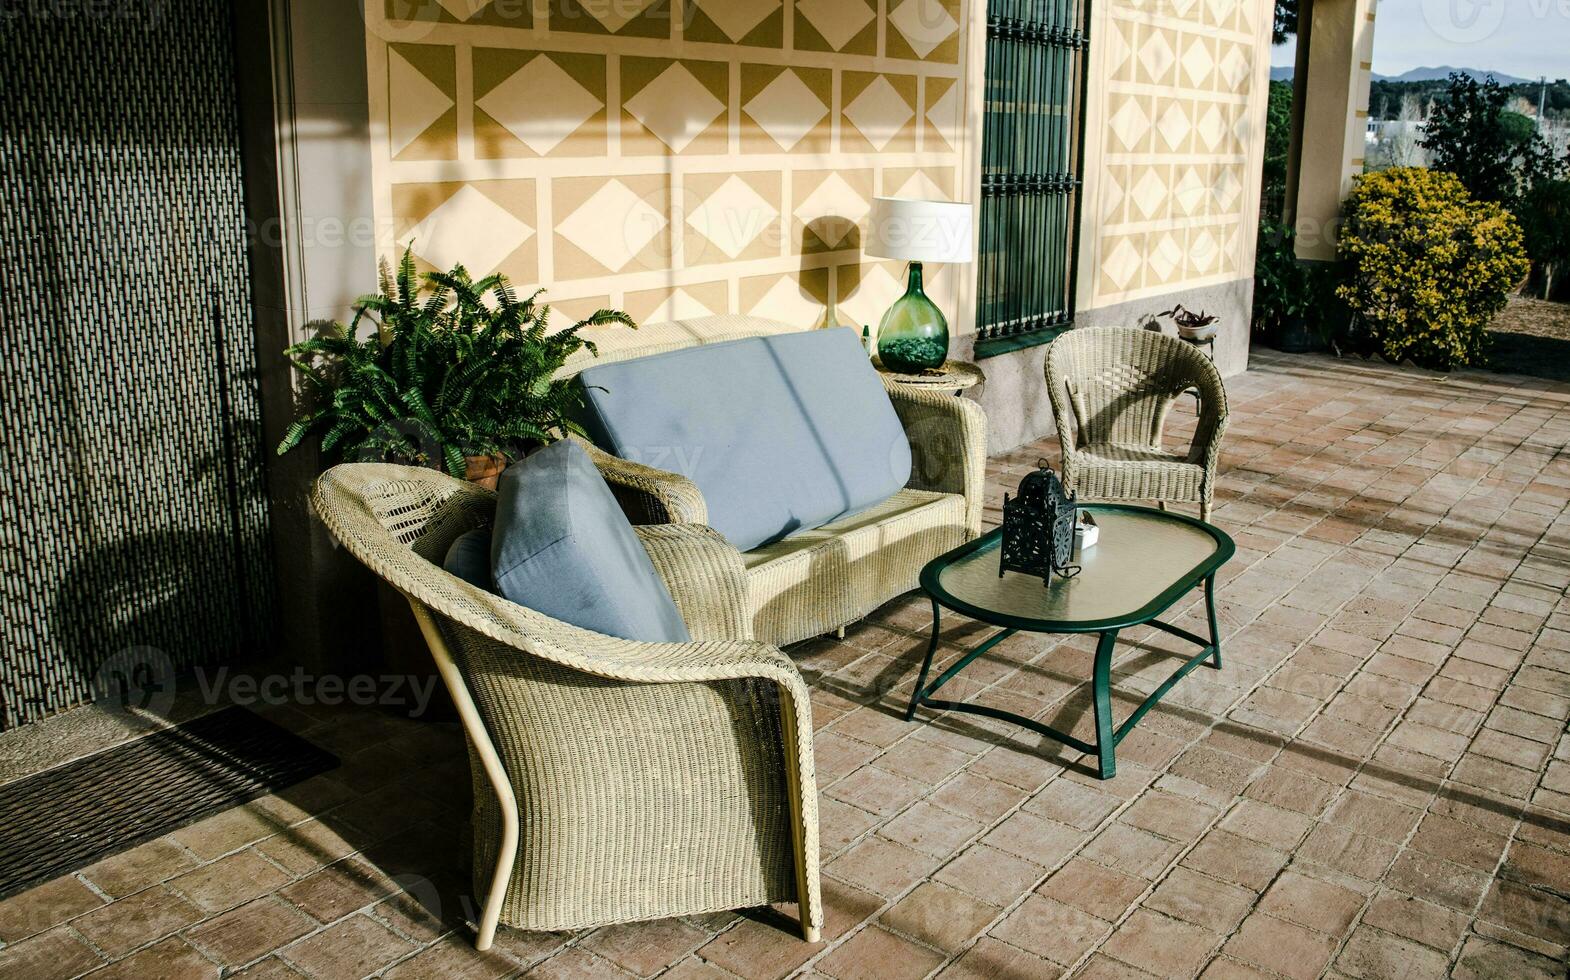 Dining coffee table with chairs on tile floor exterior. Living area in countryside house or hotel. photo